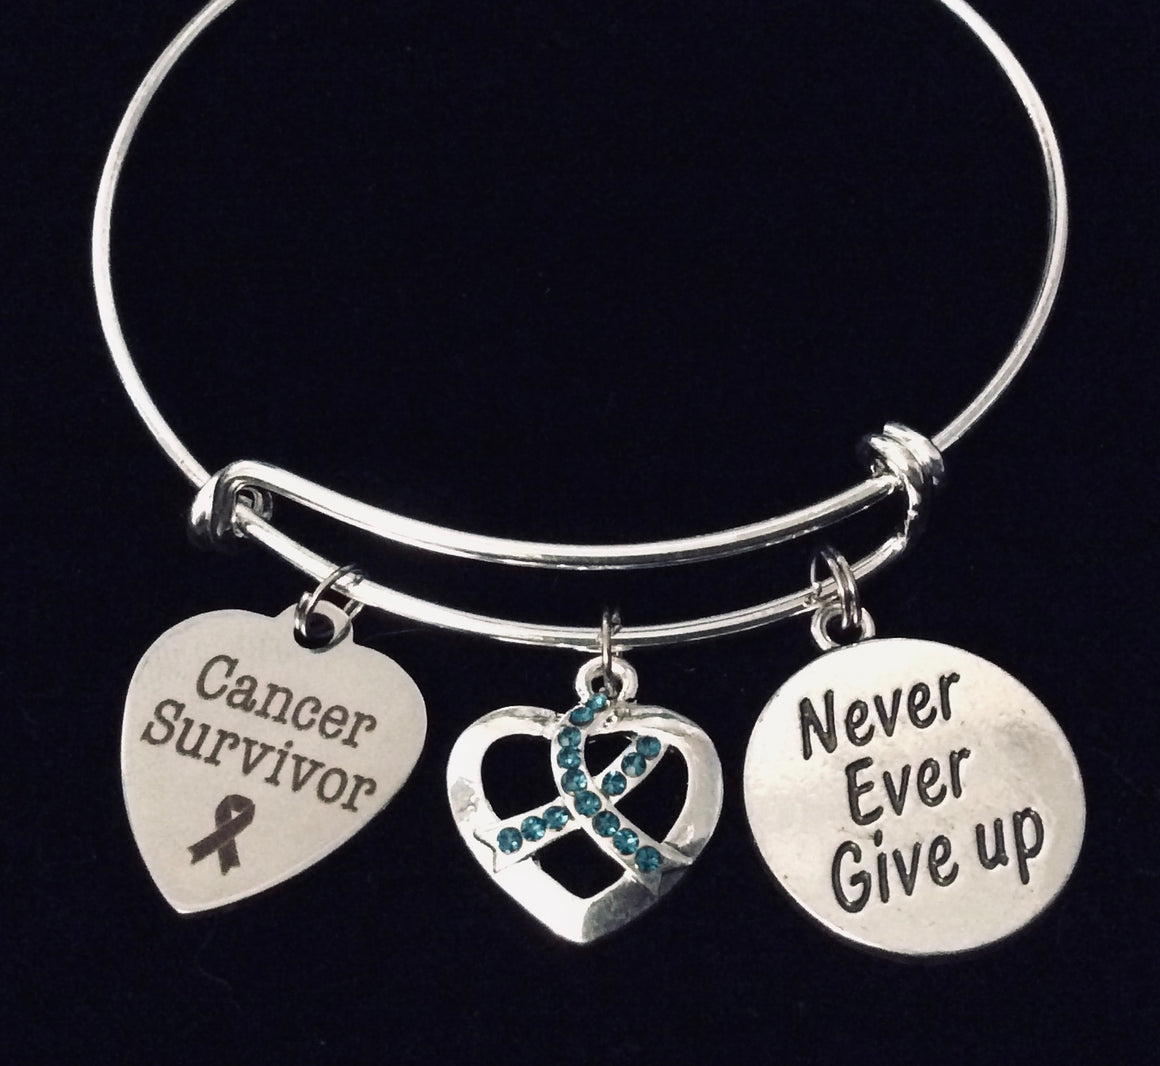 Never Give Up Cancer Survivor Jewelry Teal Expandable Charm Bracelet Adjustable Bangle One Size Fits All Gift